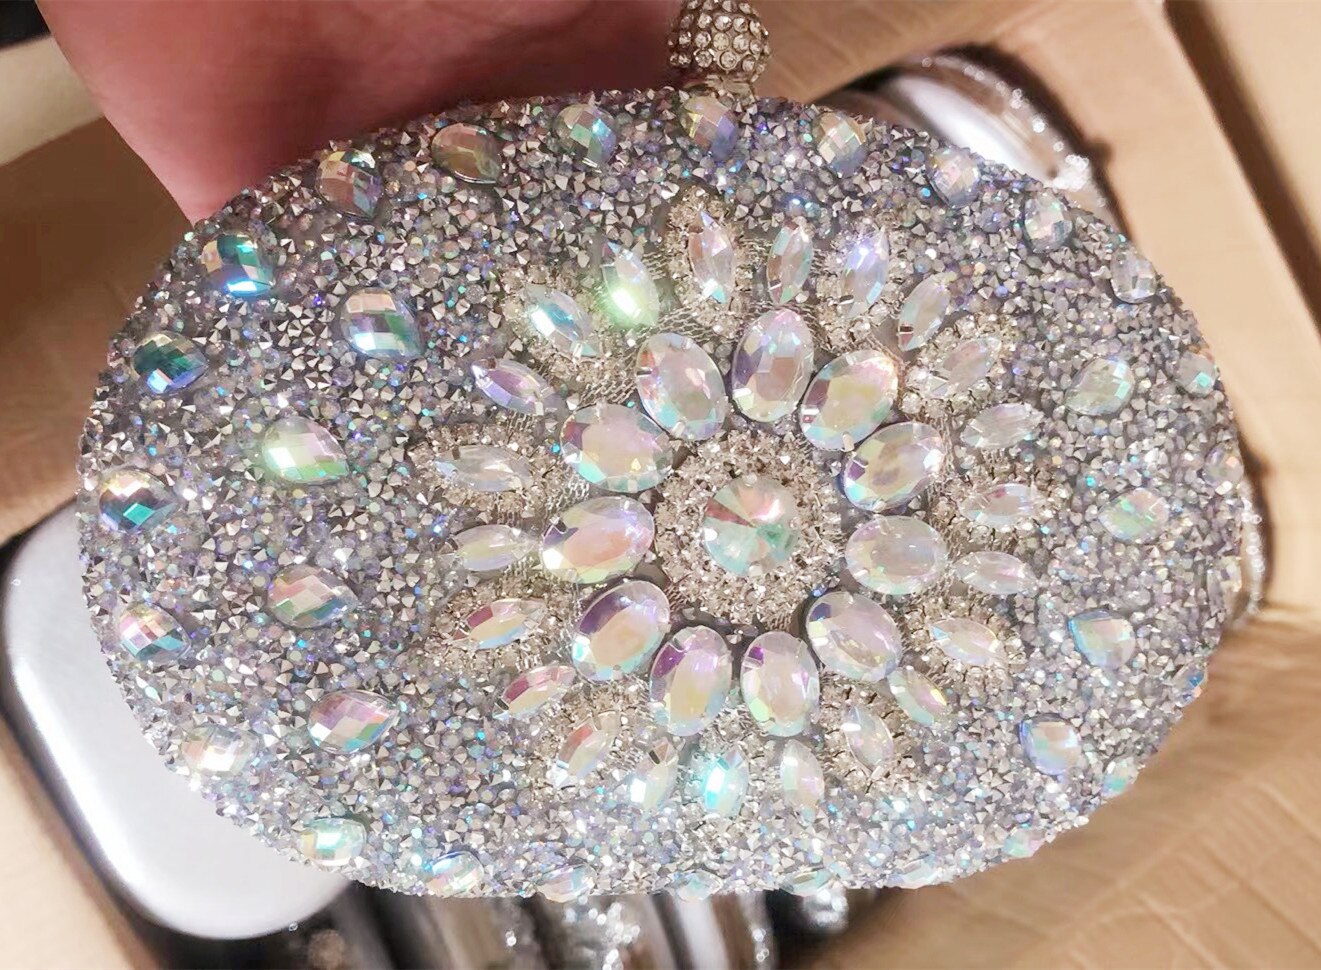 Wedding Diamond Silver Floral Crystal Sling Package Woman Clutch Bag Cell Phone Pocket Matching Wallet Purse Handbags PAP SHOP 42